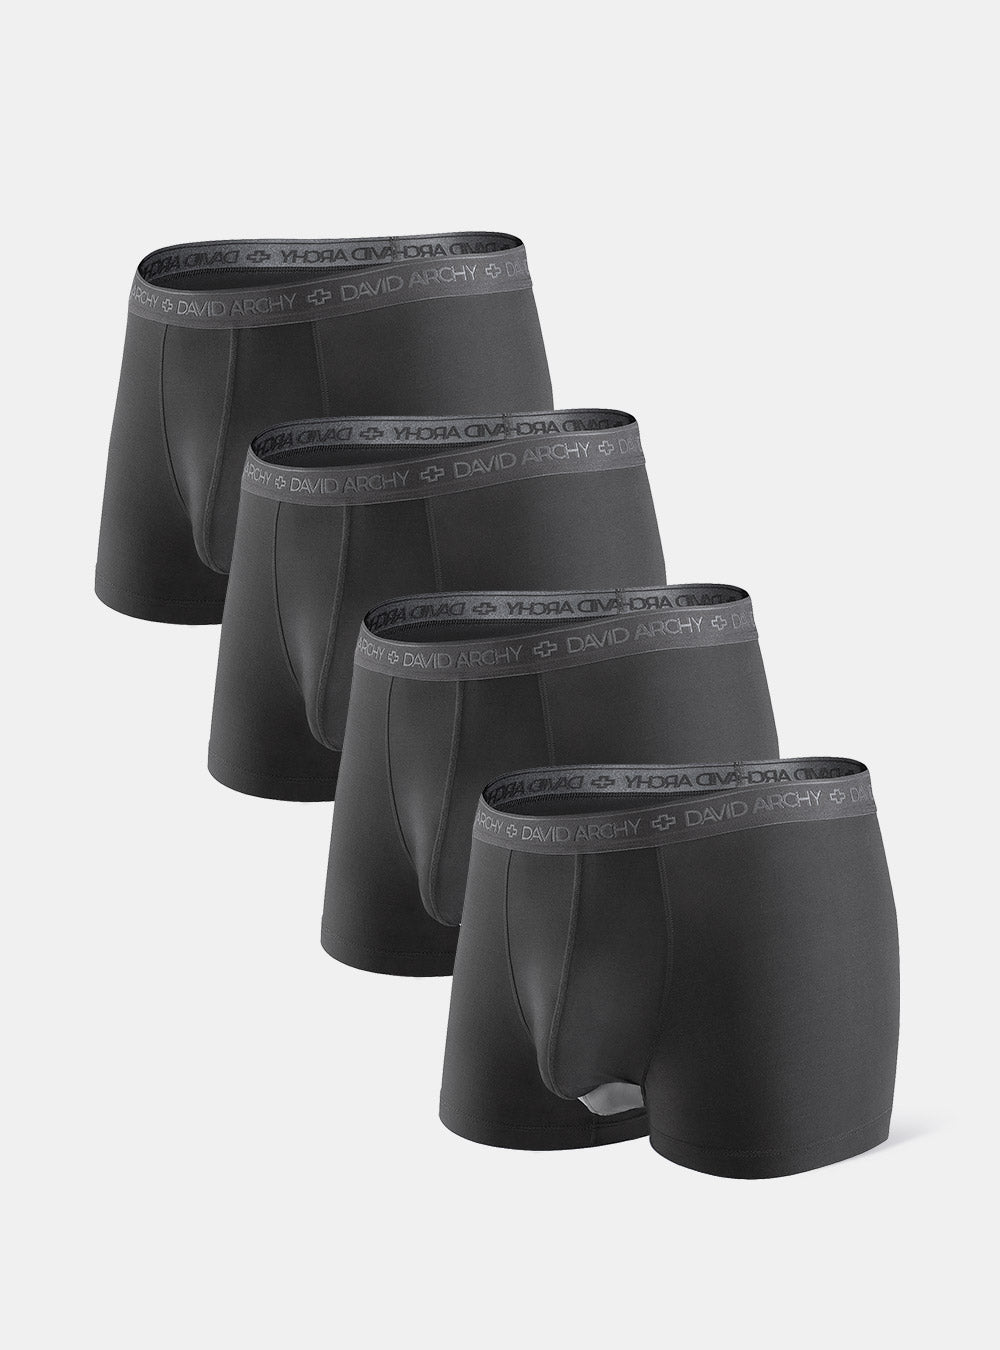 Separatec Dual Pouch Quick Dry Athletic Sports Boxer Briefs with Fly